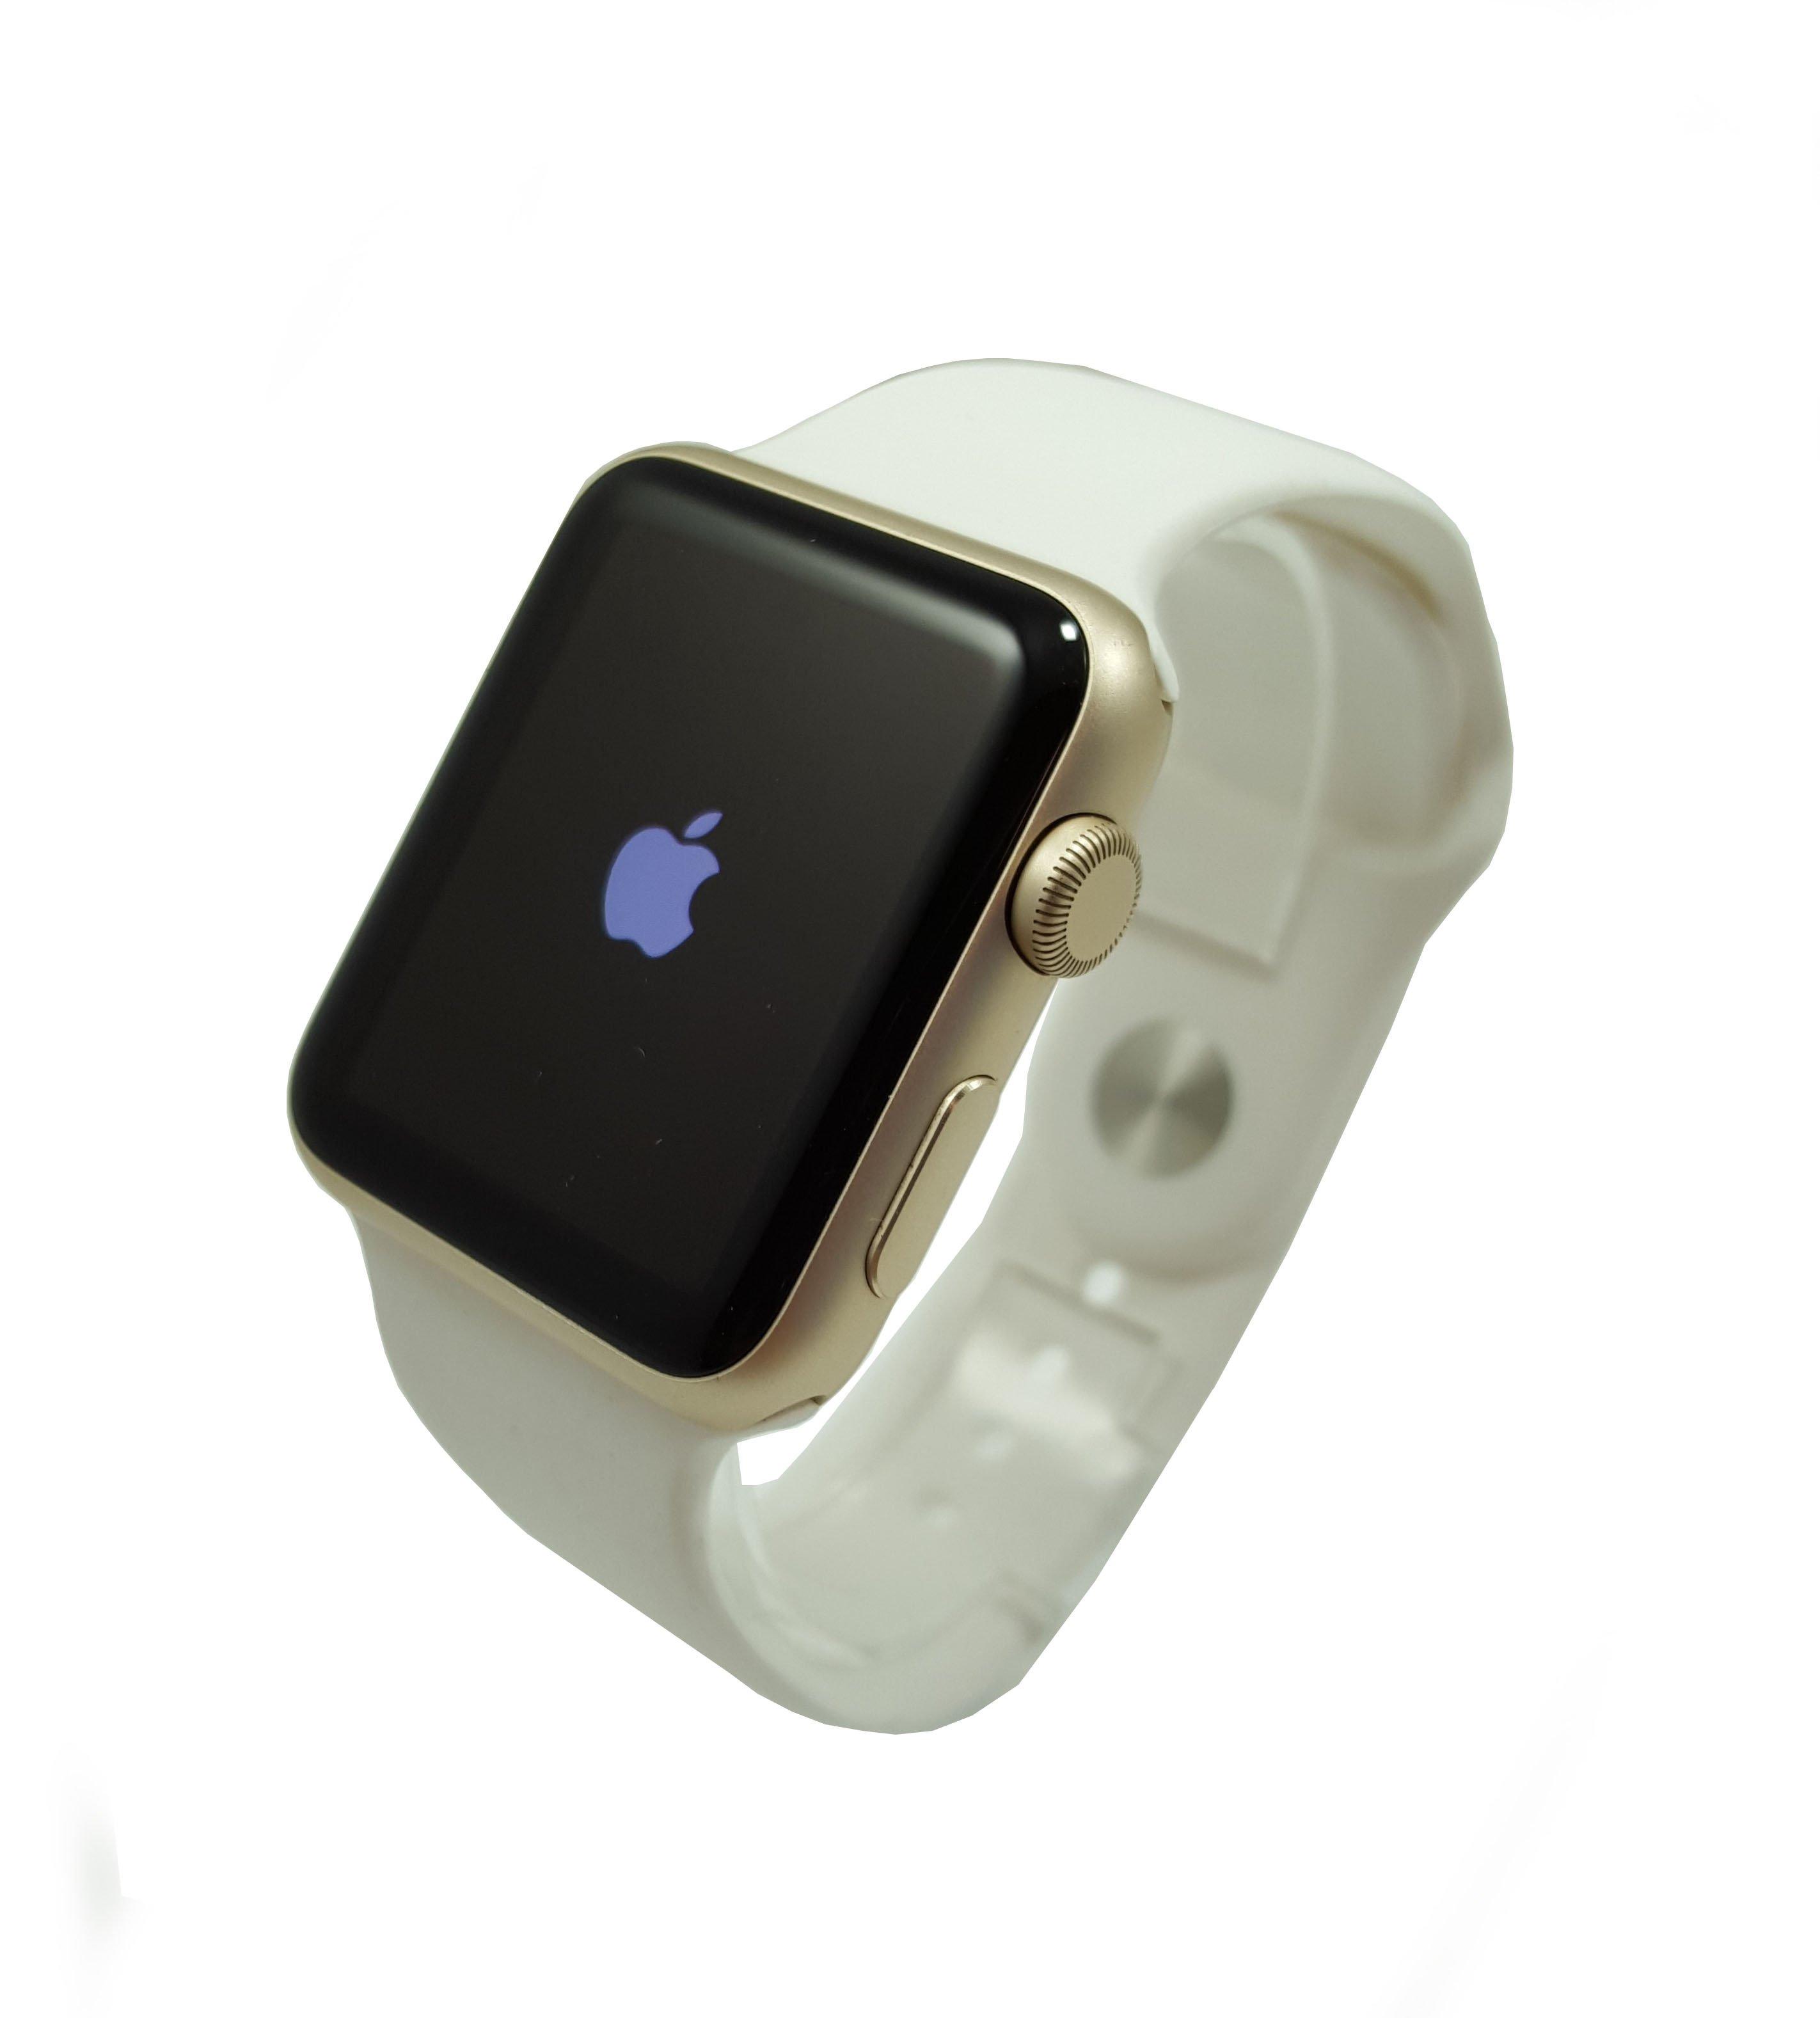 trade in apple watch series 4